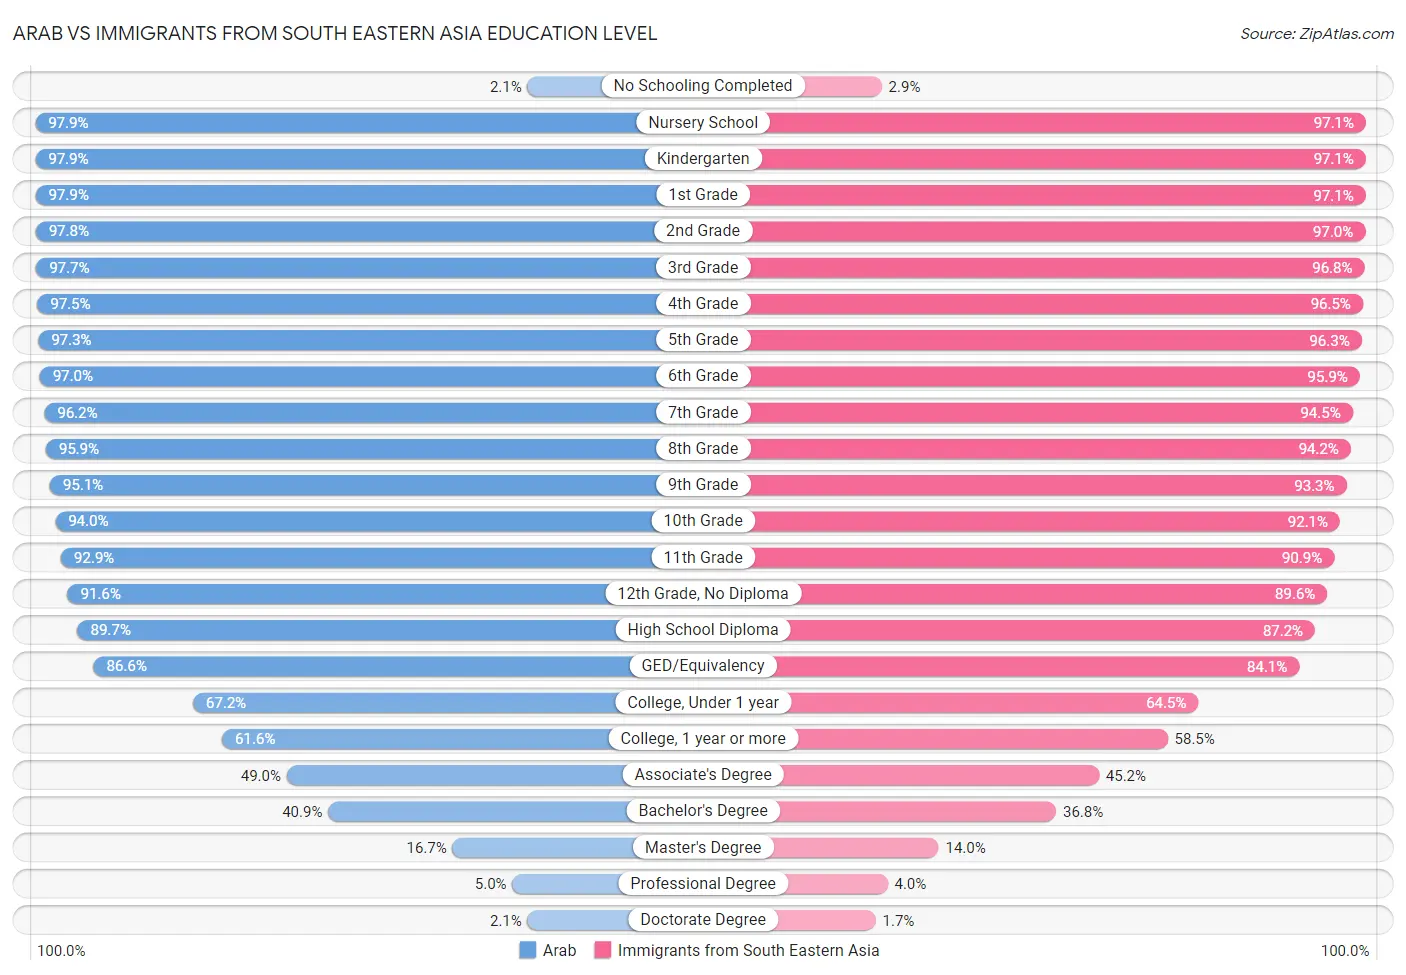 Arab vs Immigrants from South Eastern Asia Education Level